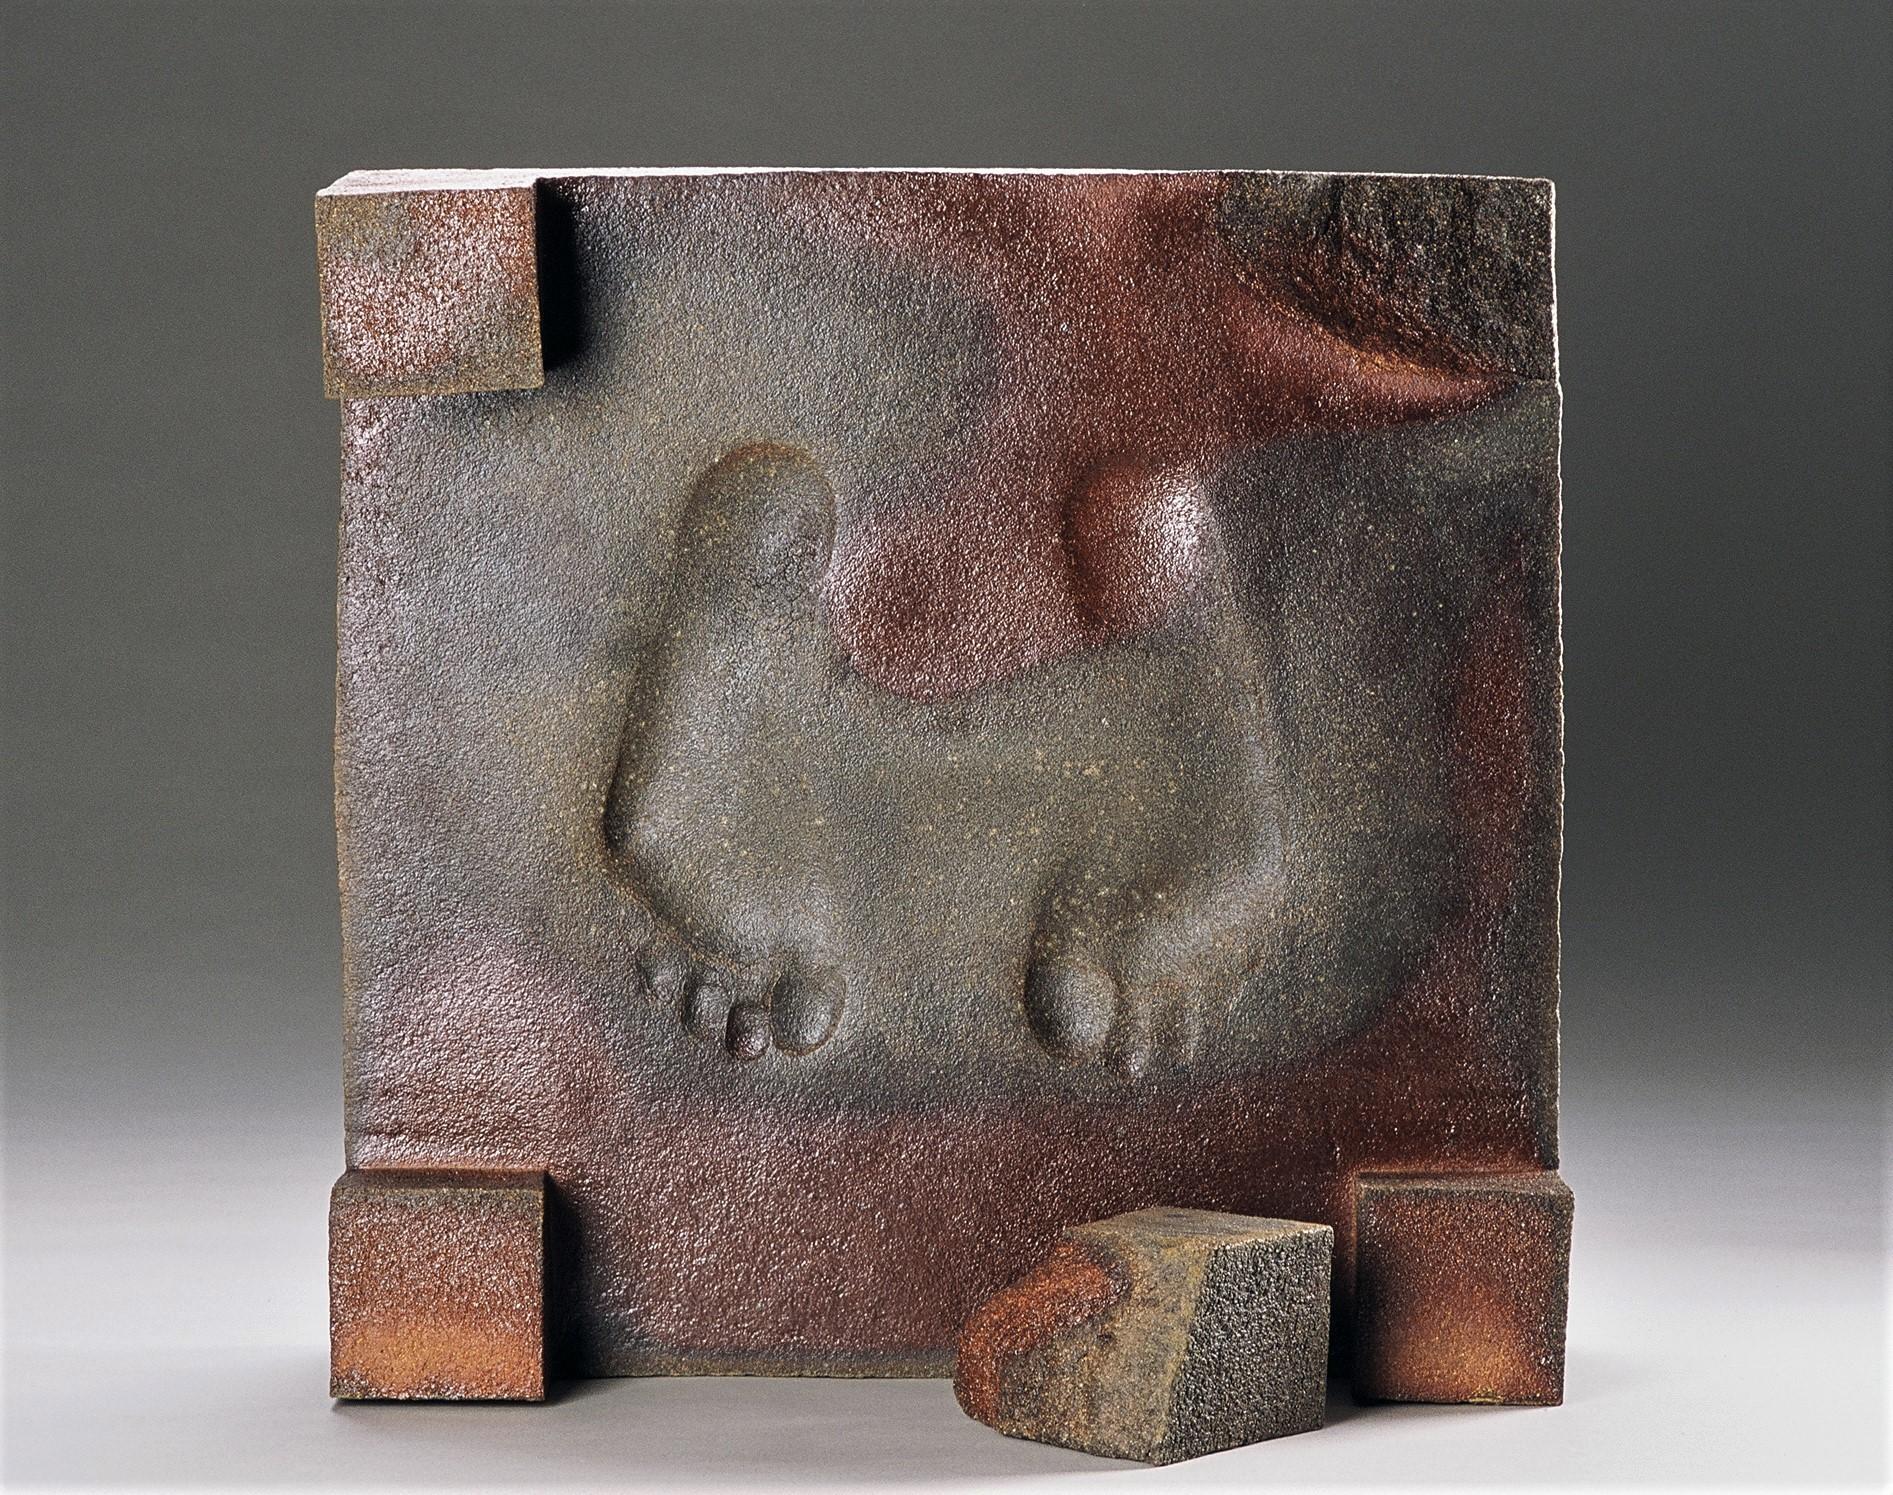 Tony Moore Figurative Sculpture - Ceramic wood-fired sculpture, impression of feet: 'I And Thou '